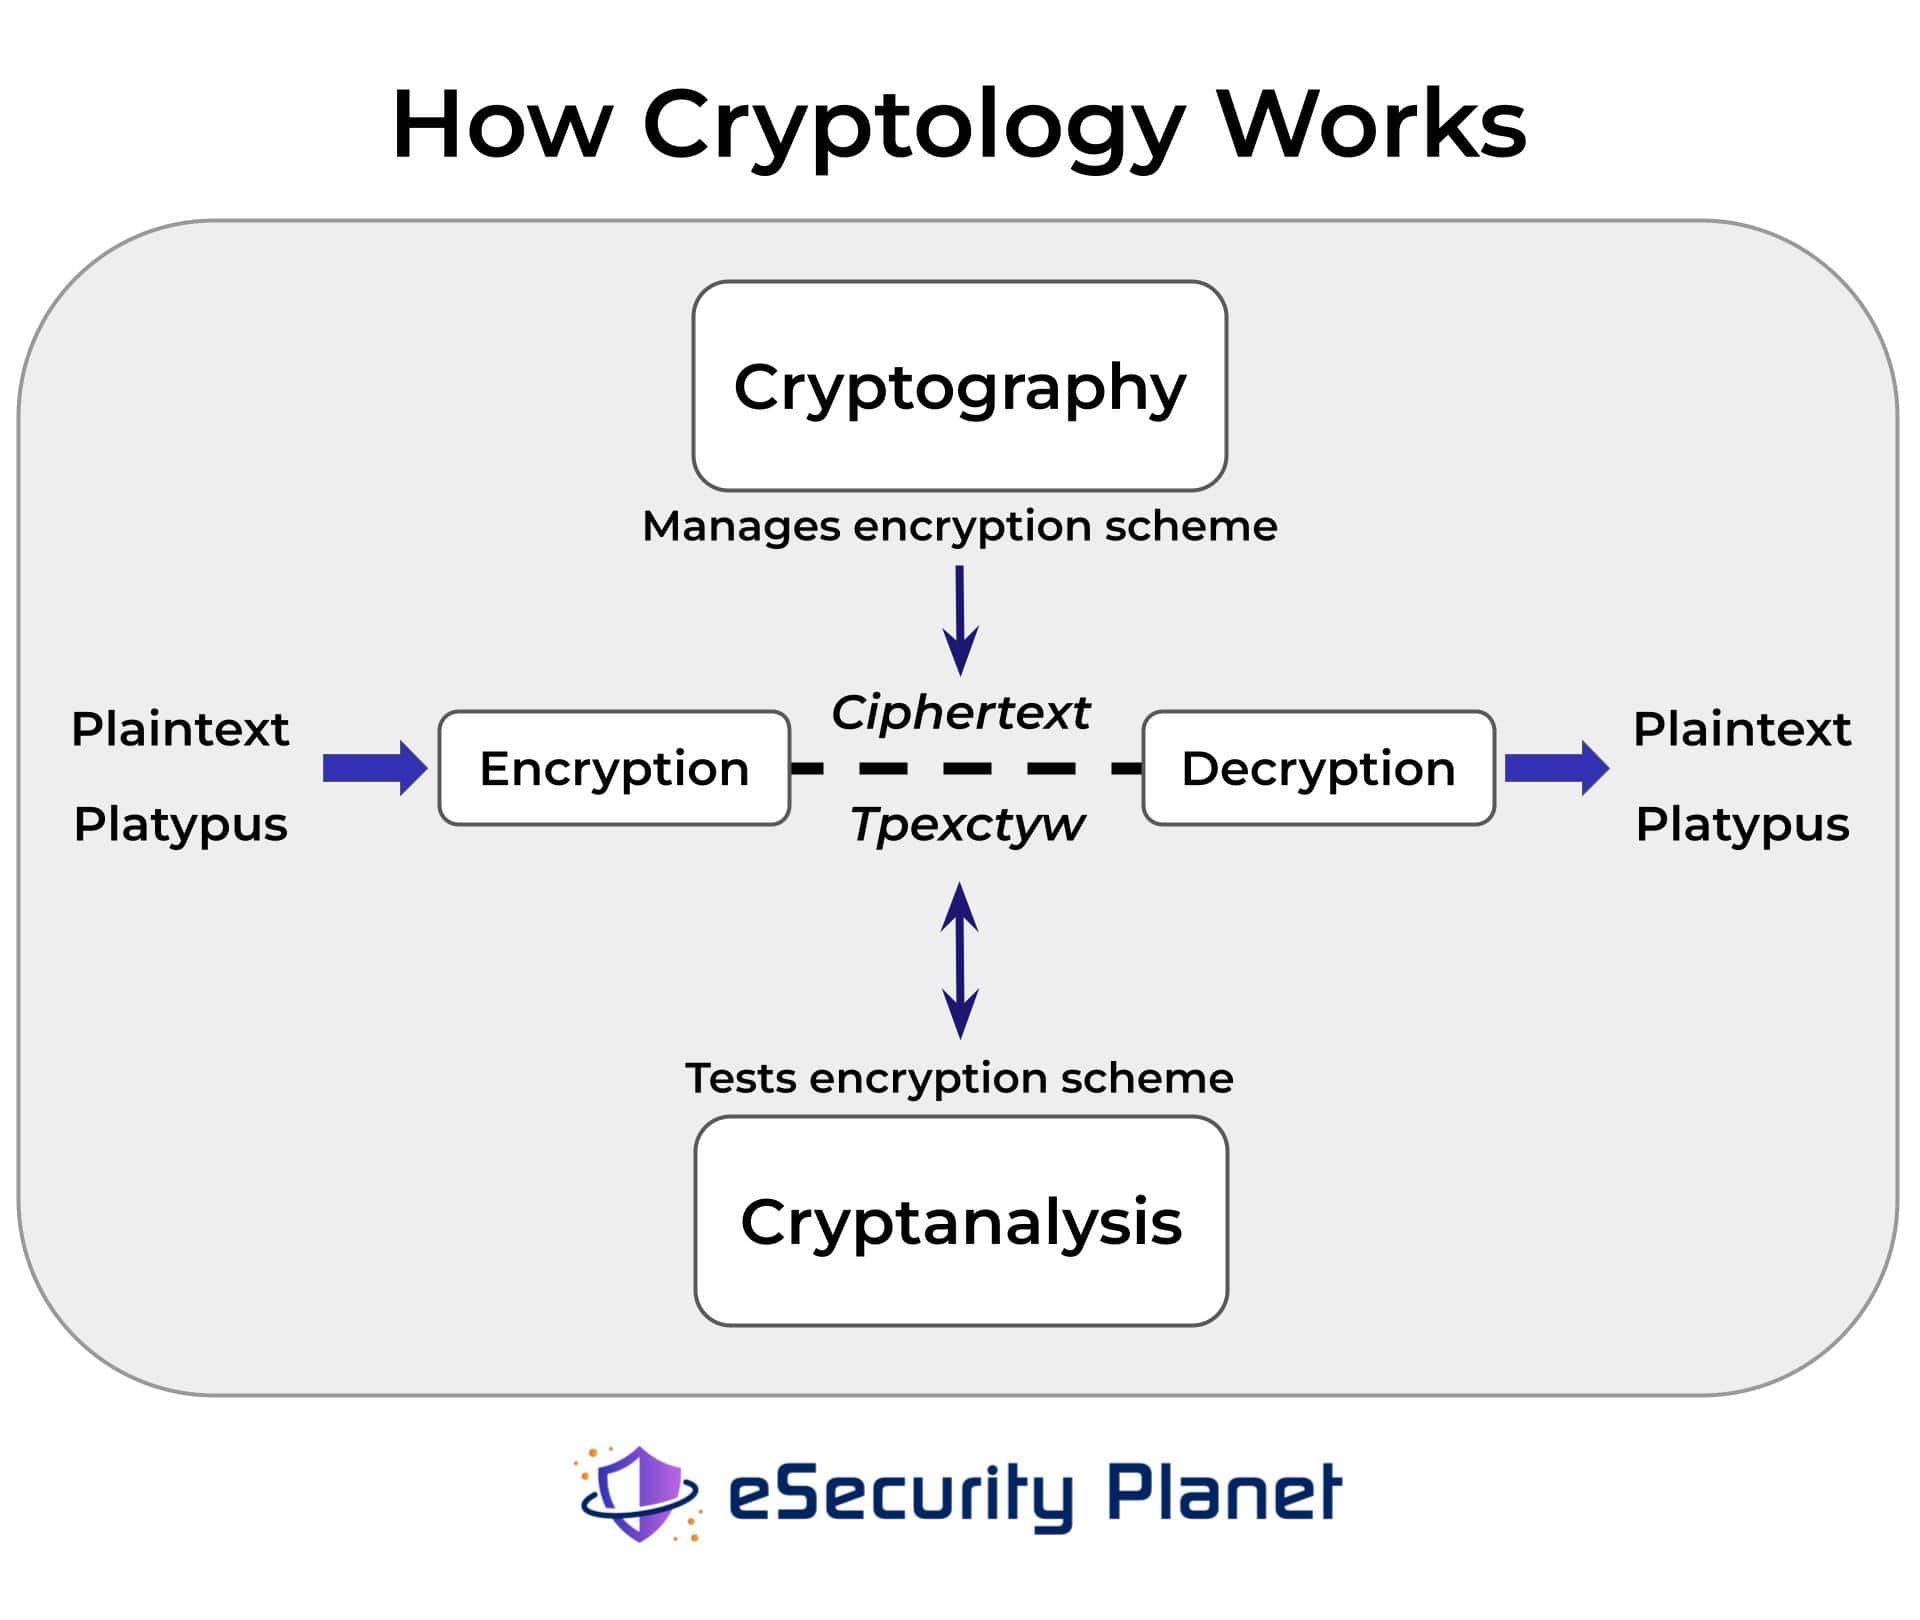 A visual diagram showing the relationship between cryptography and cryptanalysis.